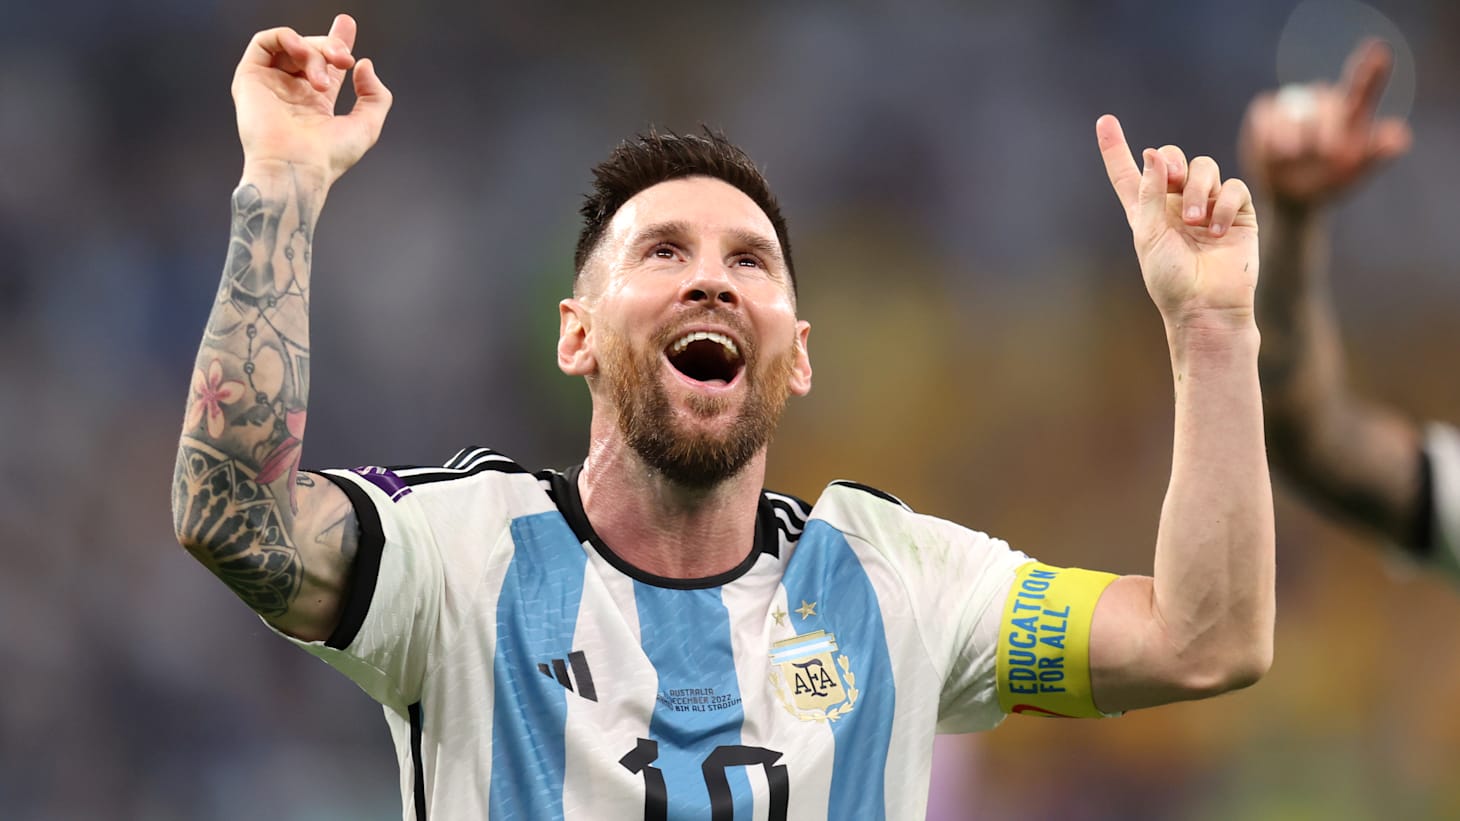 Ronaldo vs Messi at World Cup 2022, and the merciful end of the